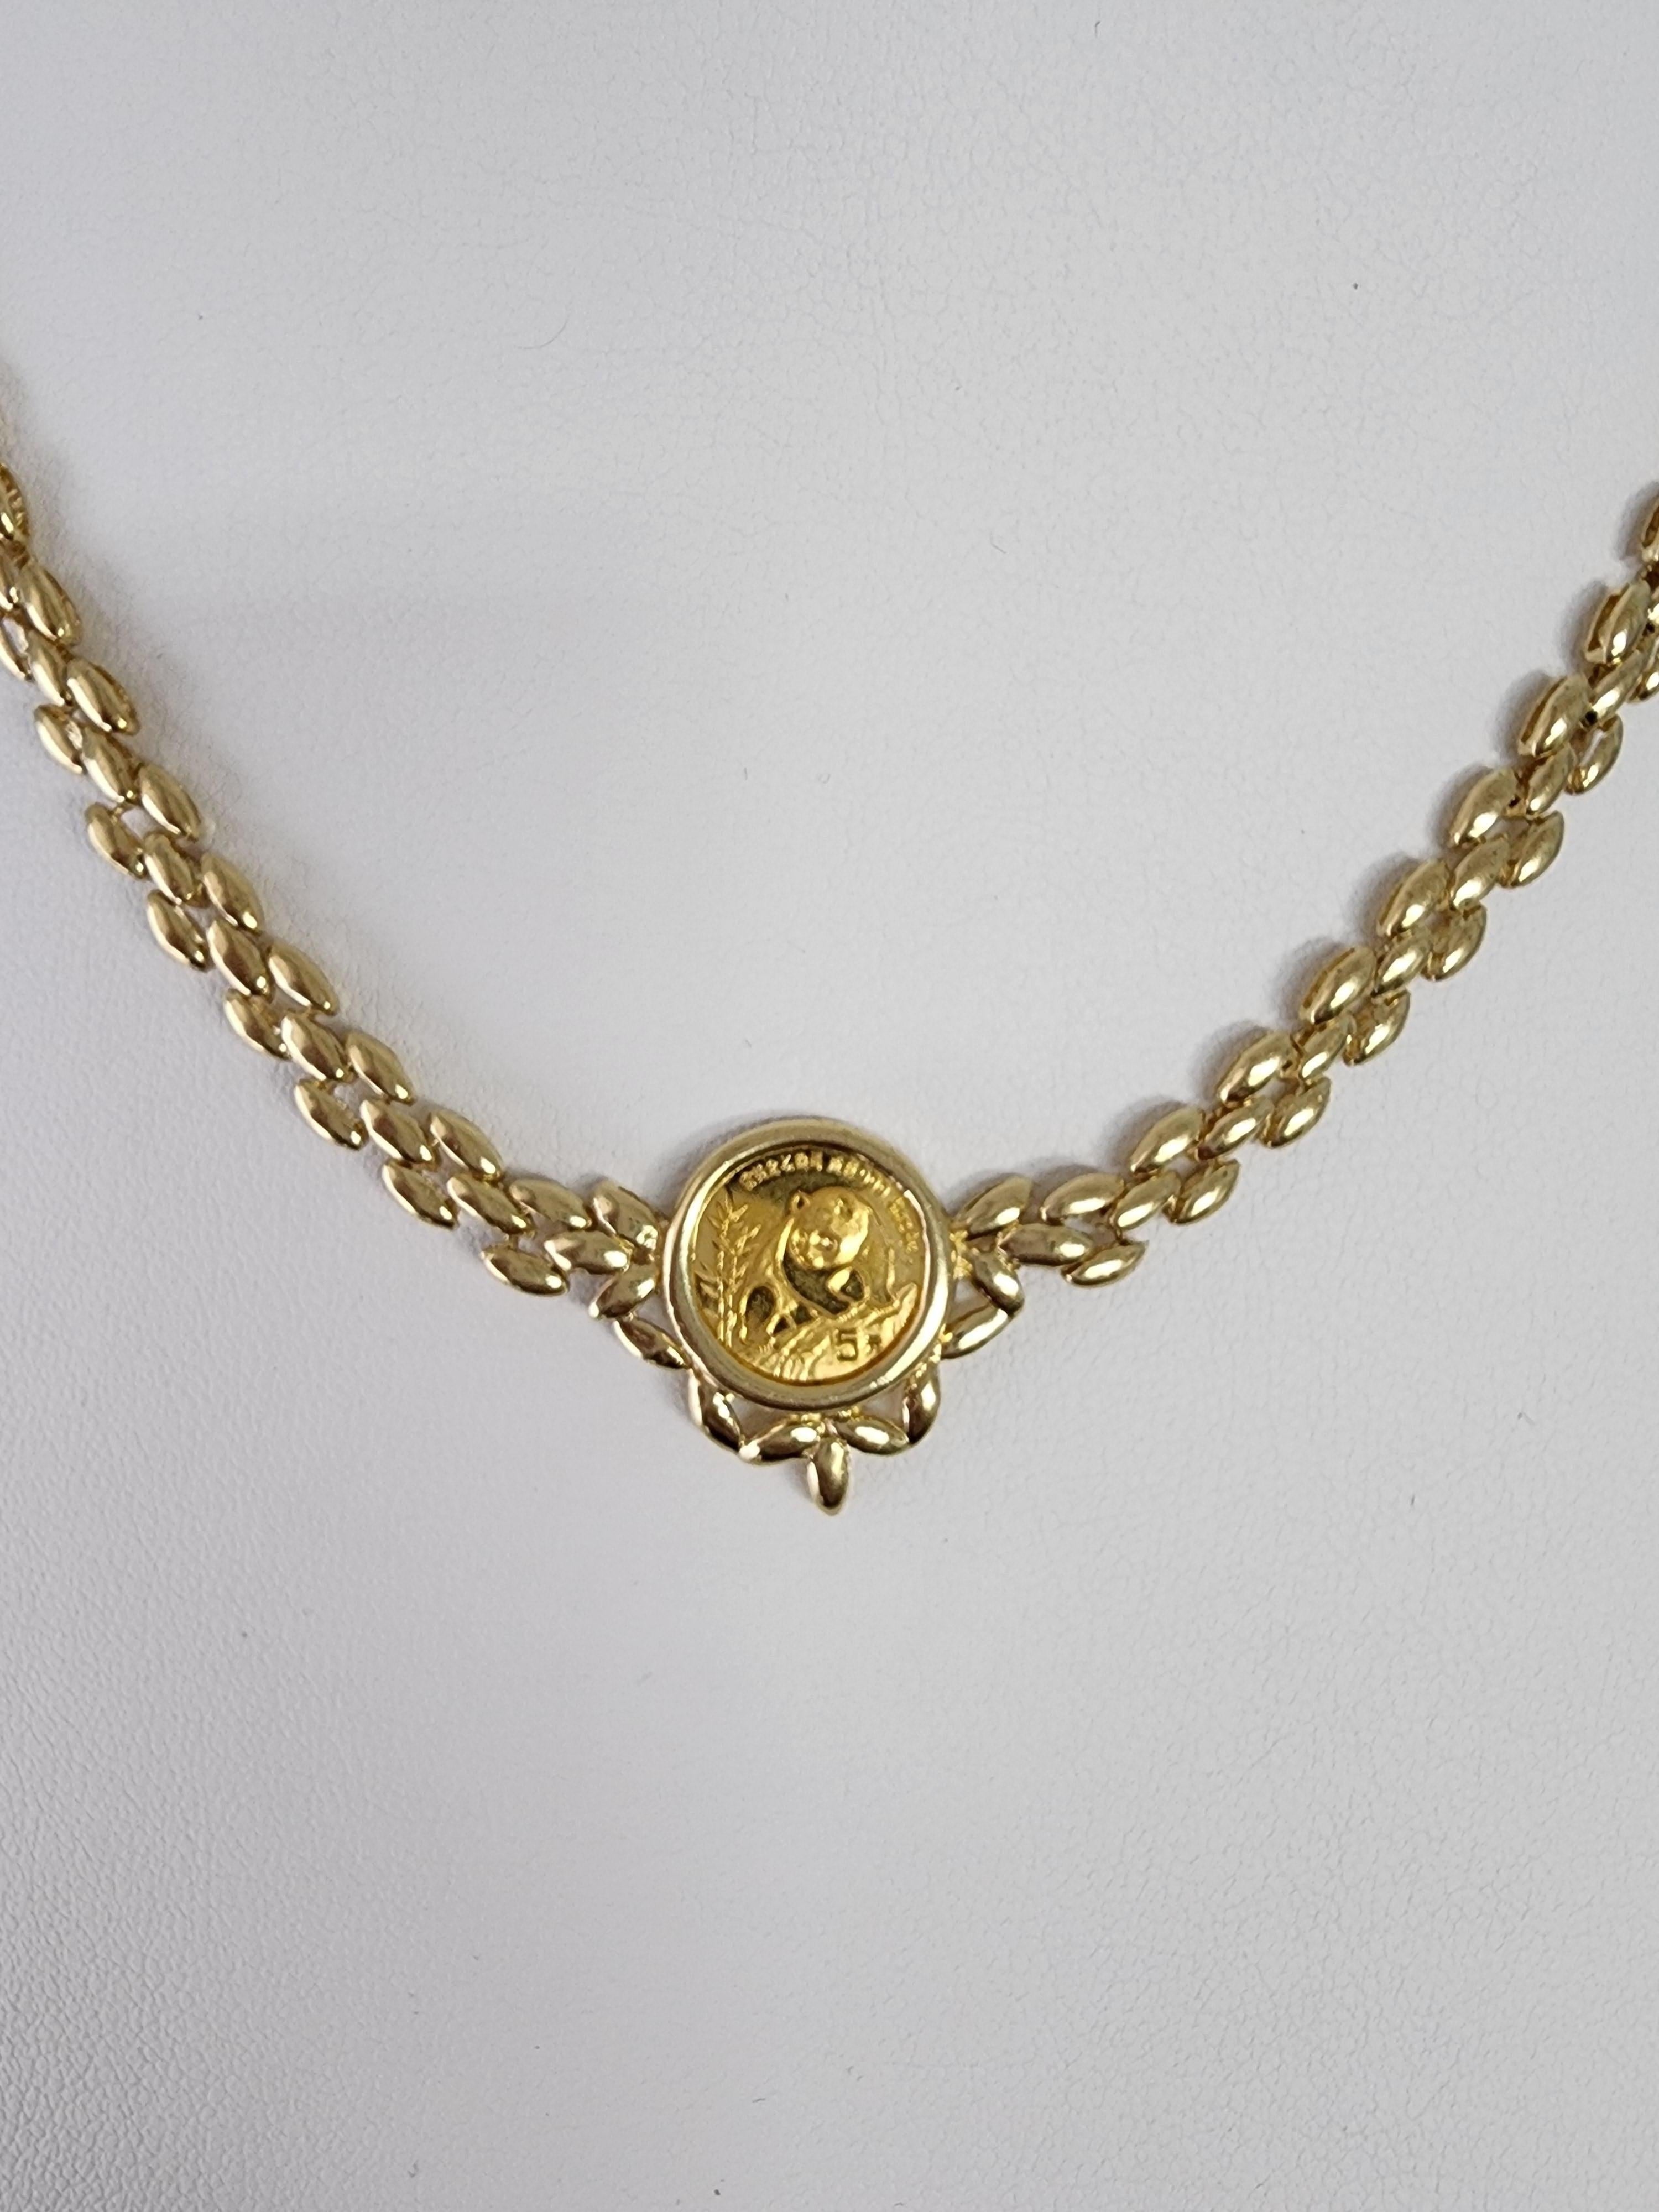 1/20OZ Panda Coin Necklace with 14k Yellow Gold Polished Link Chain- signet pend Neuf - En vente à Sugar Land, TX